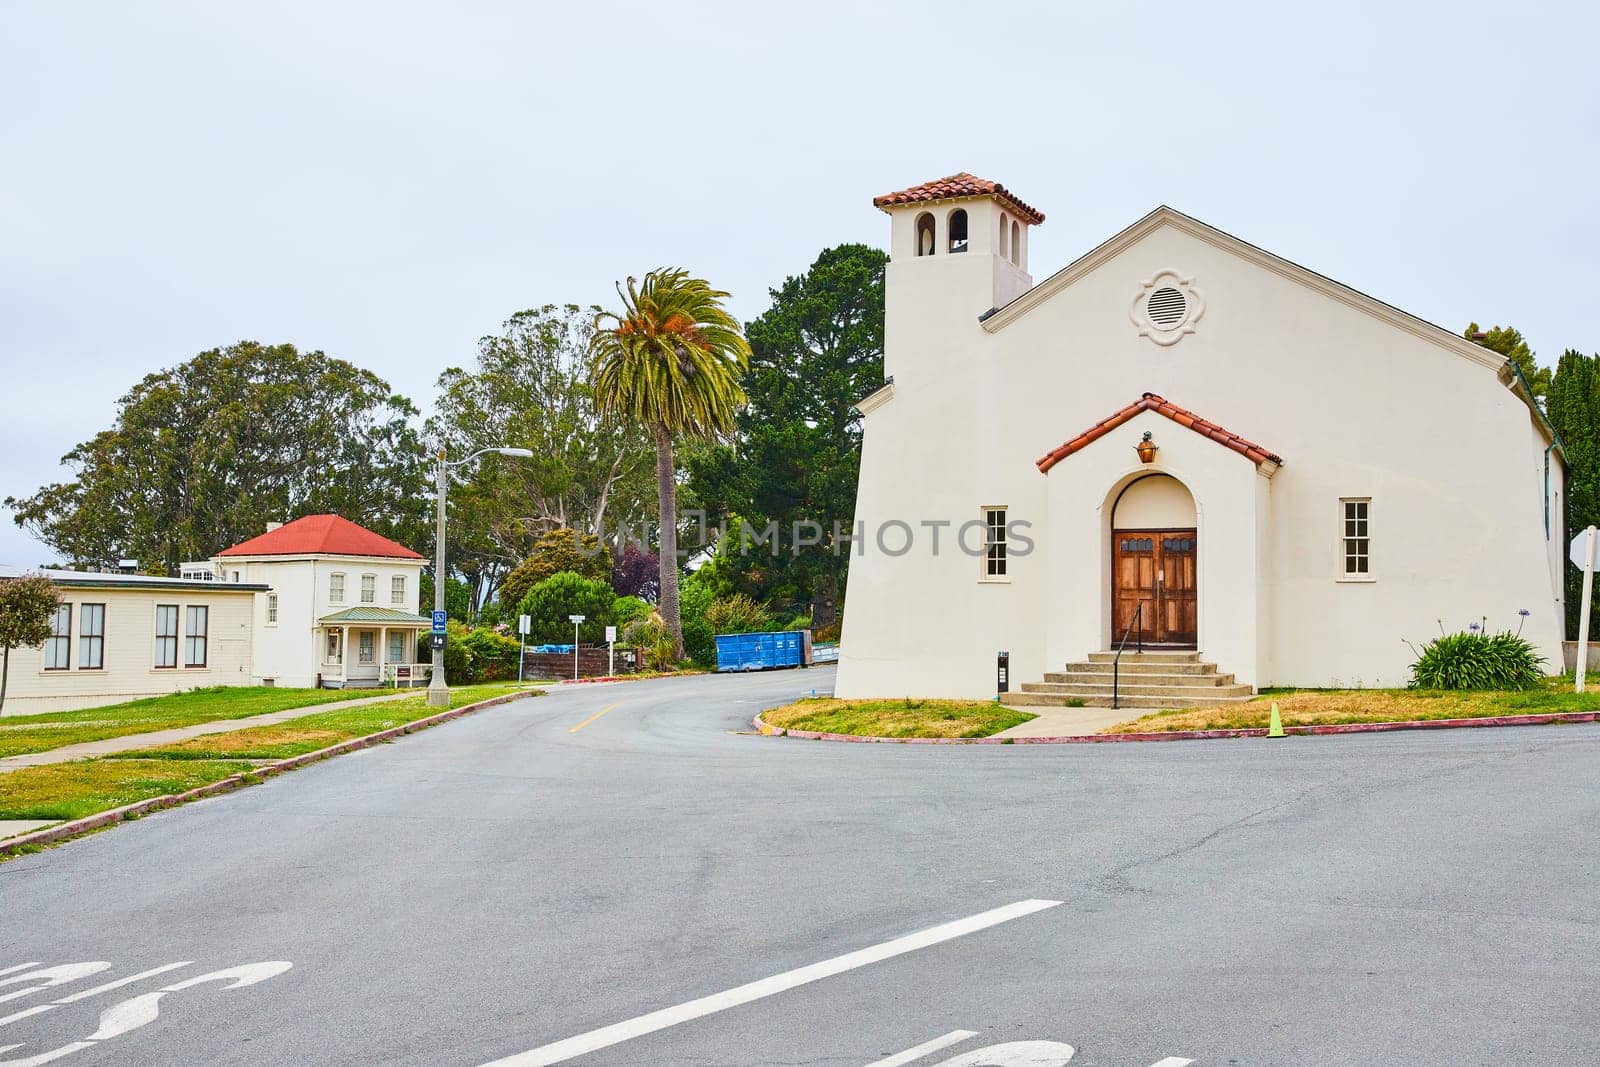 Image of Simple white church with road splitting off to either side of it